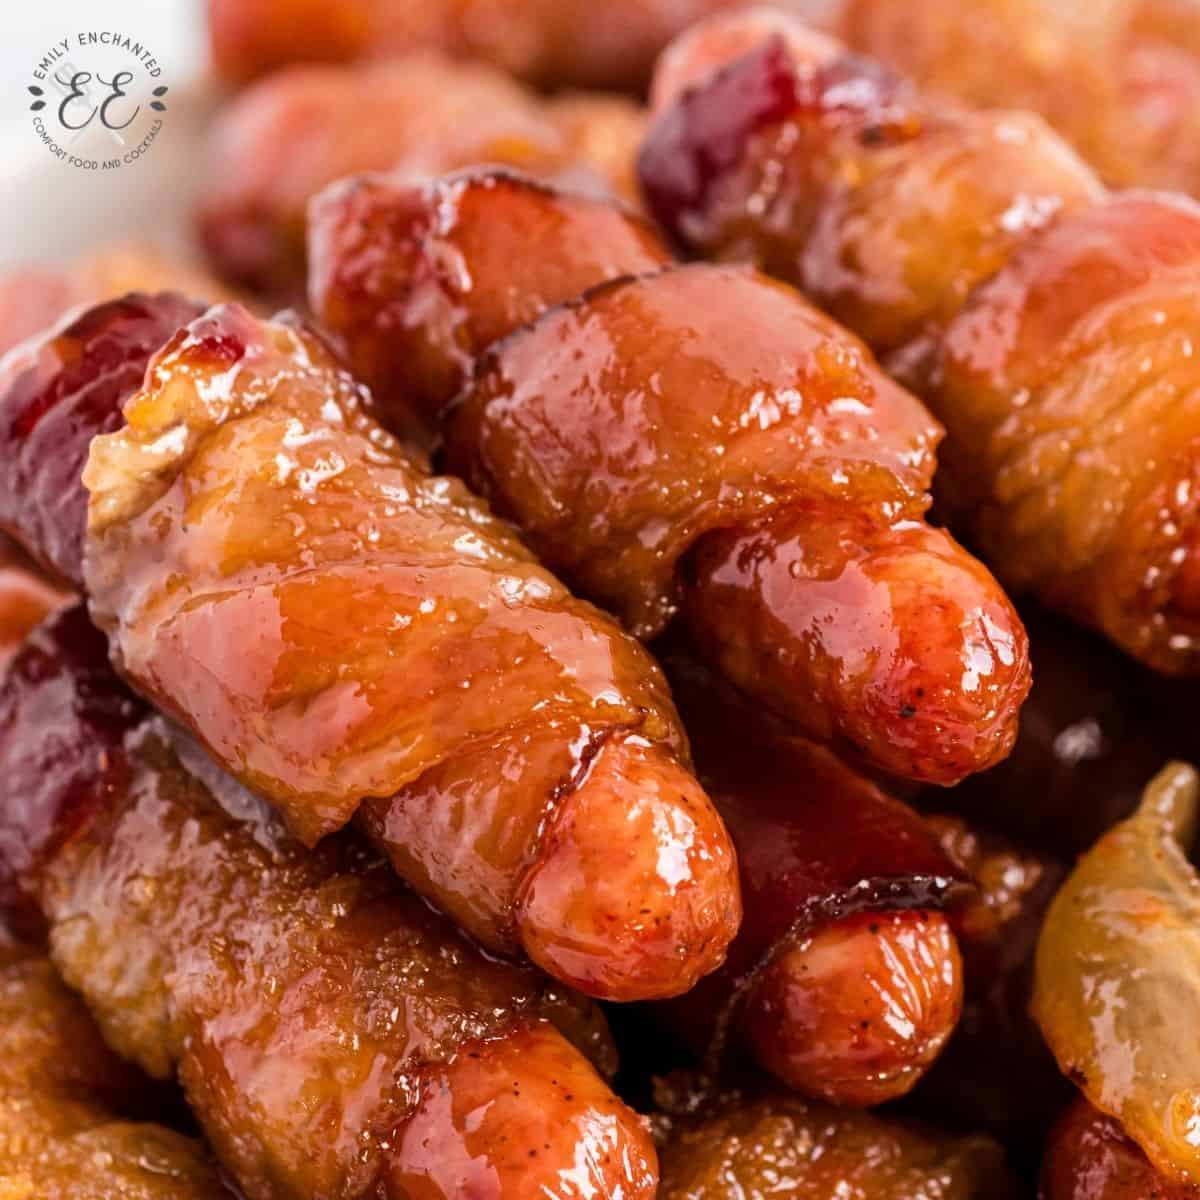 Sweet and Spicy Bacon Wrapped Smokies